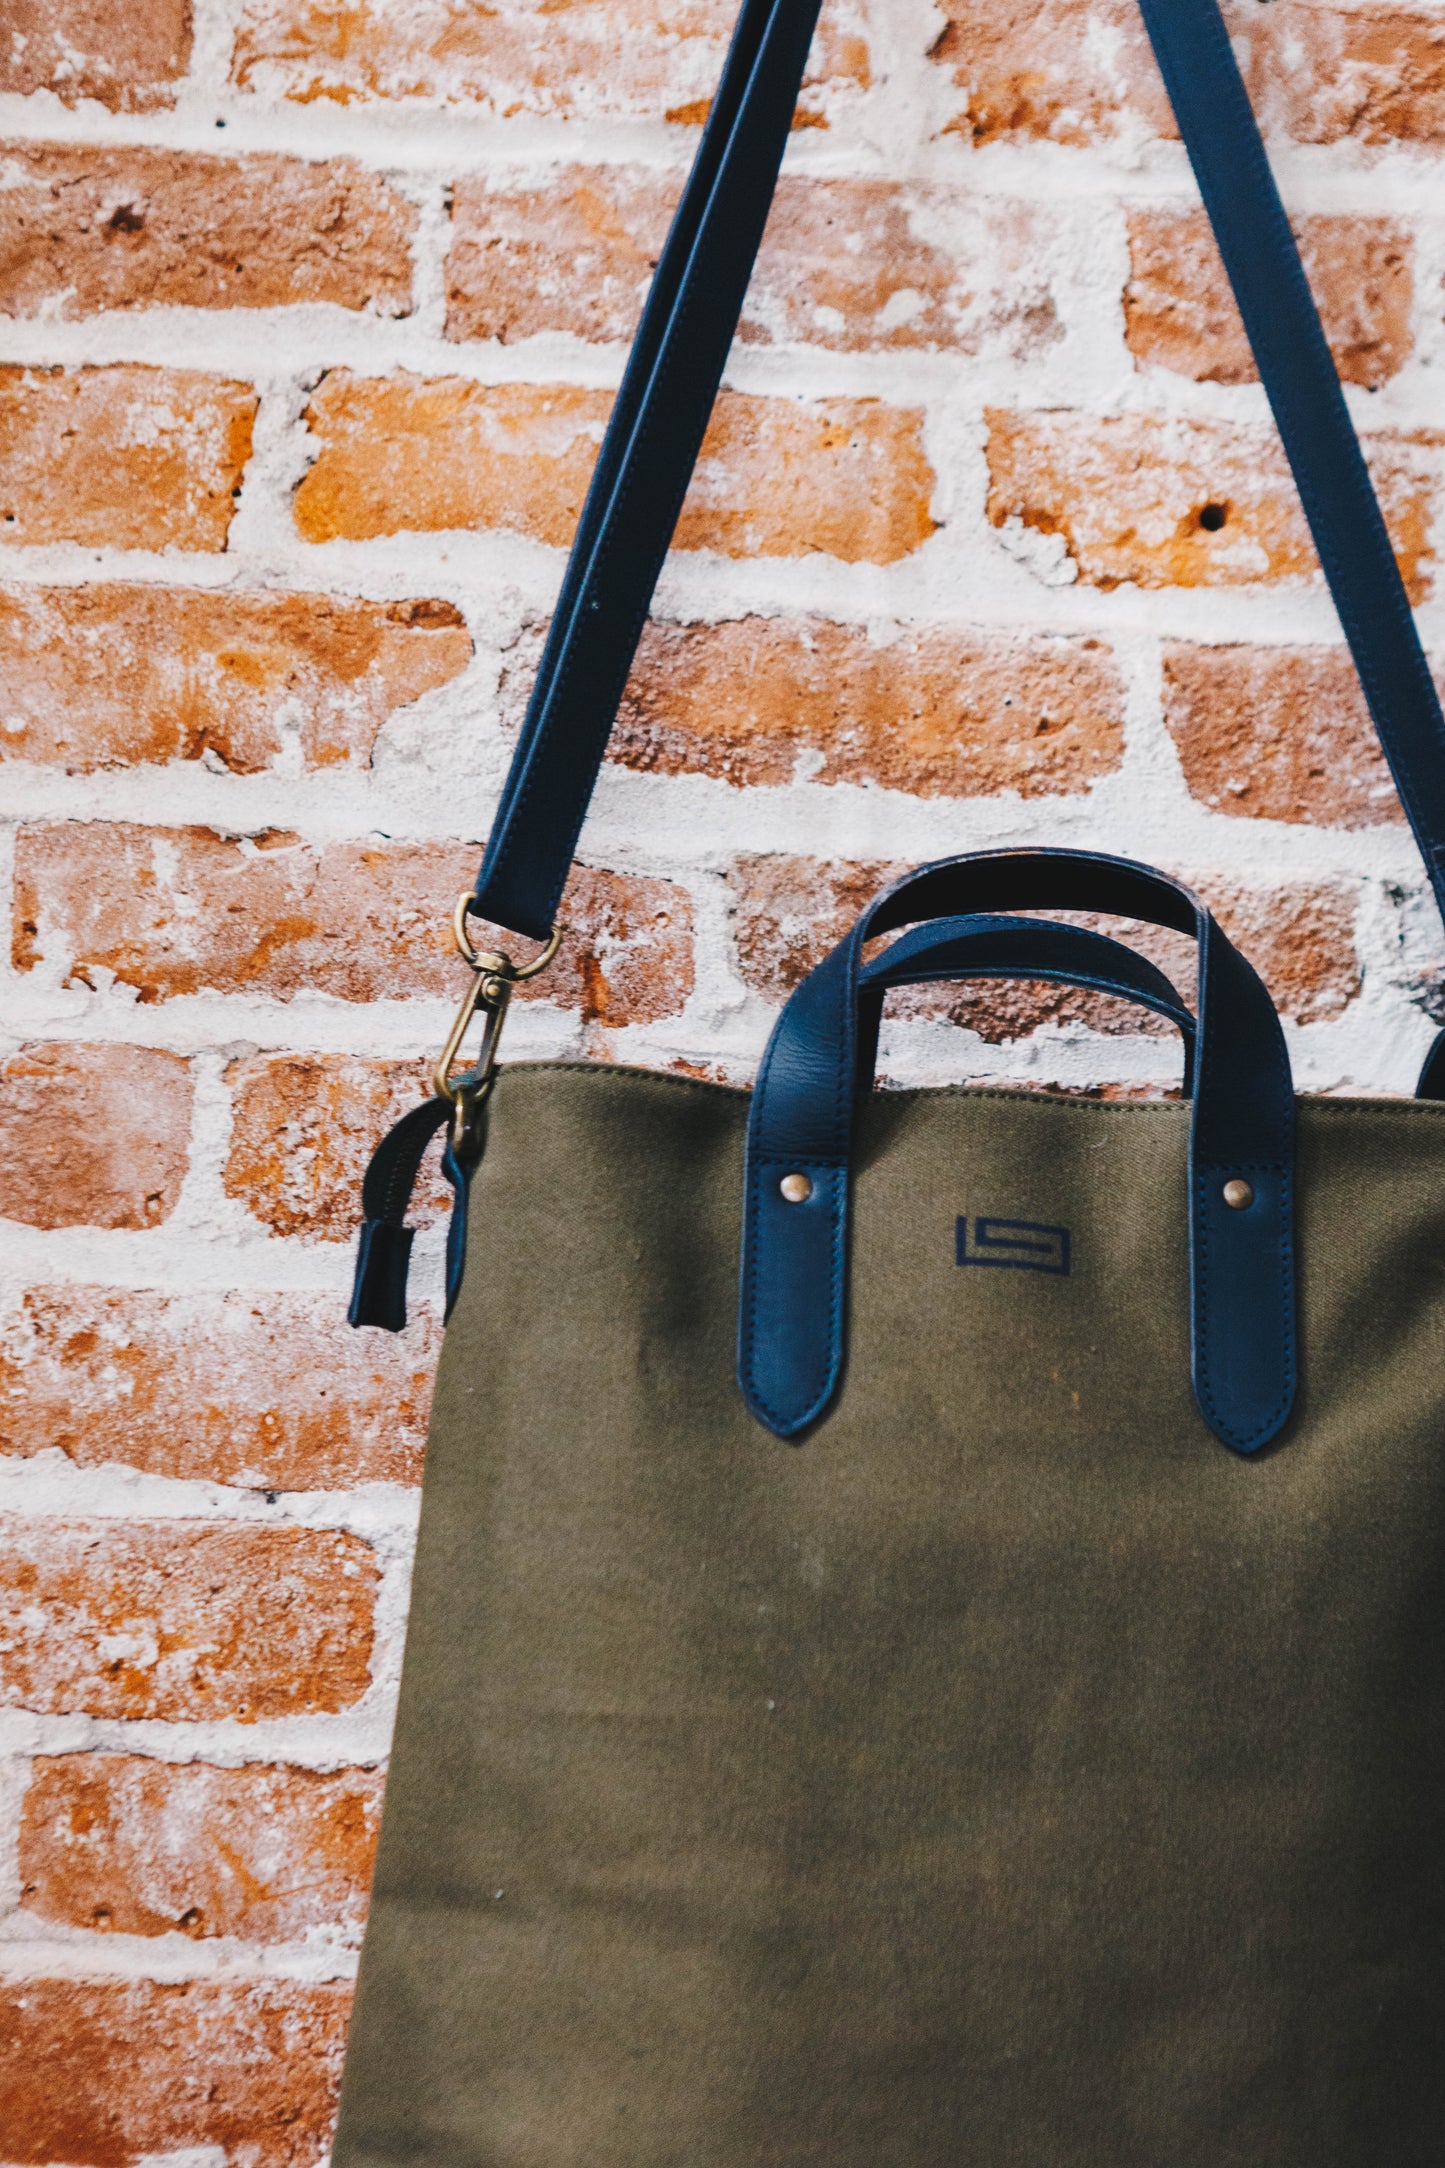 The Old Town Tote - Green Canvas Navy Leather